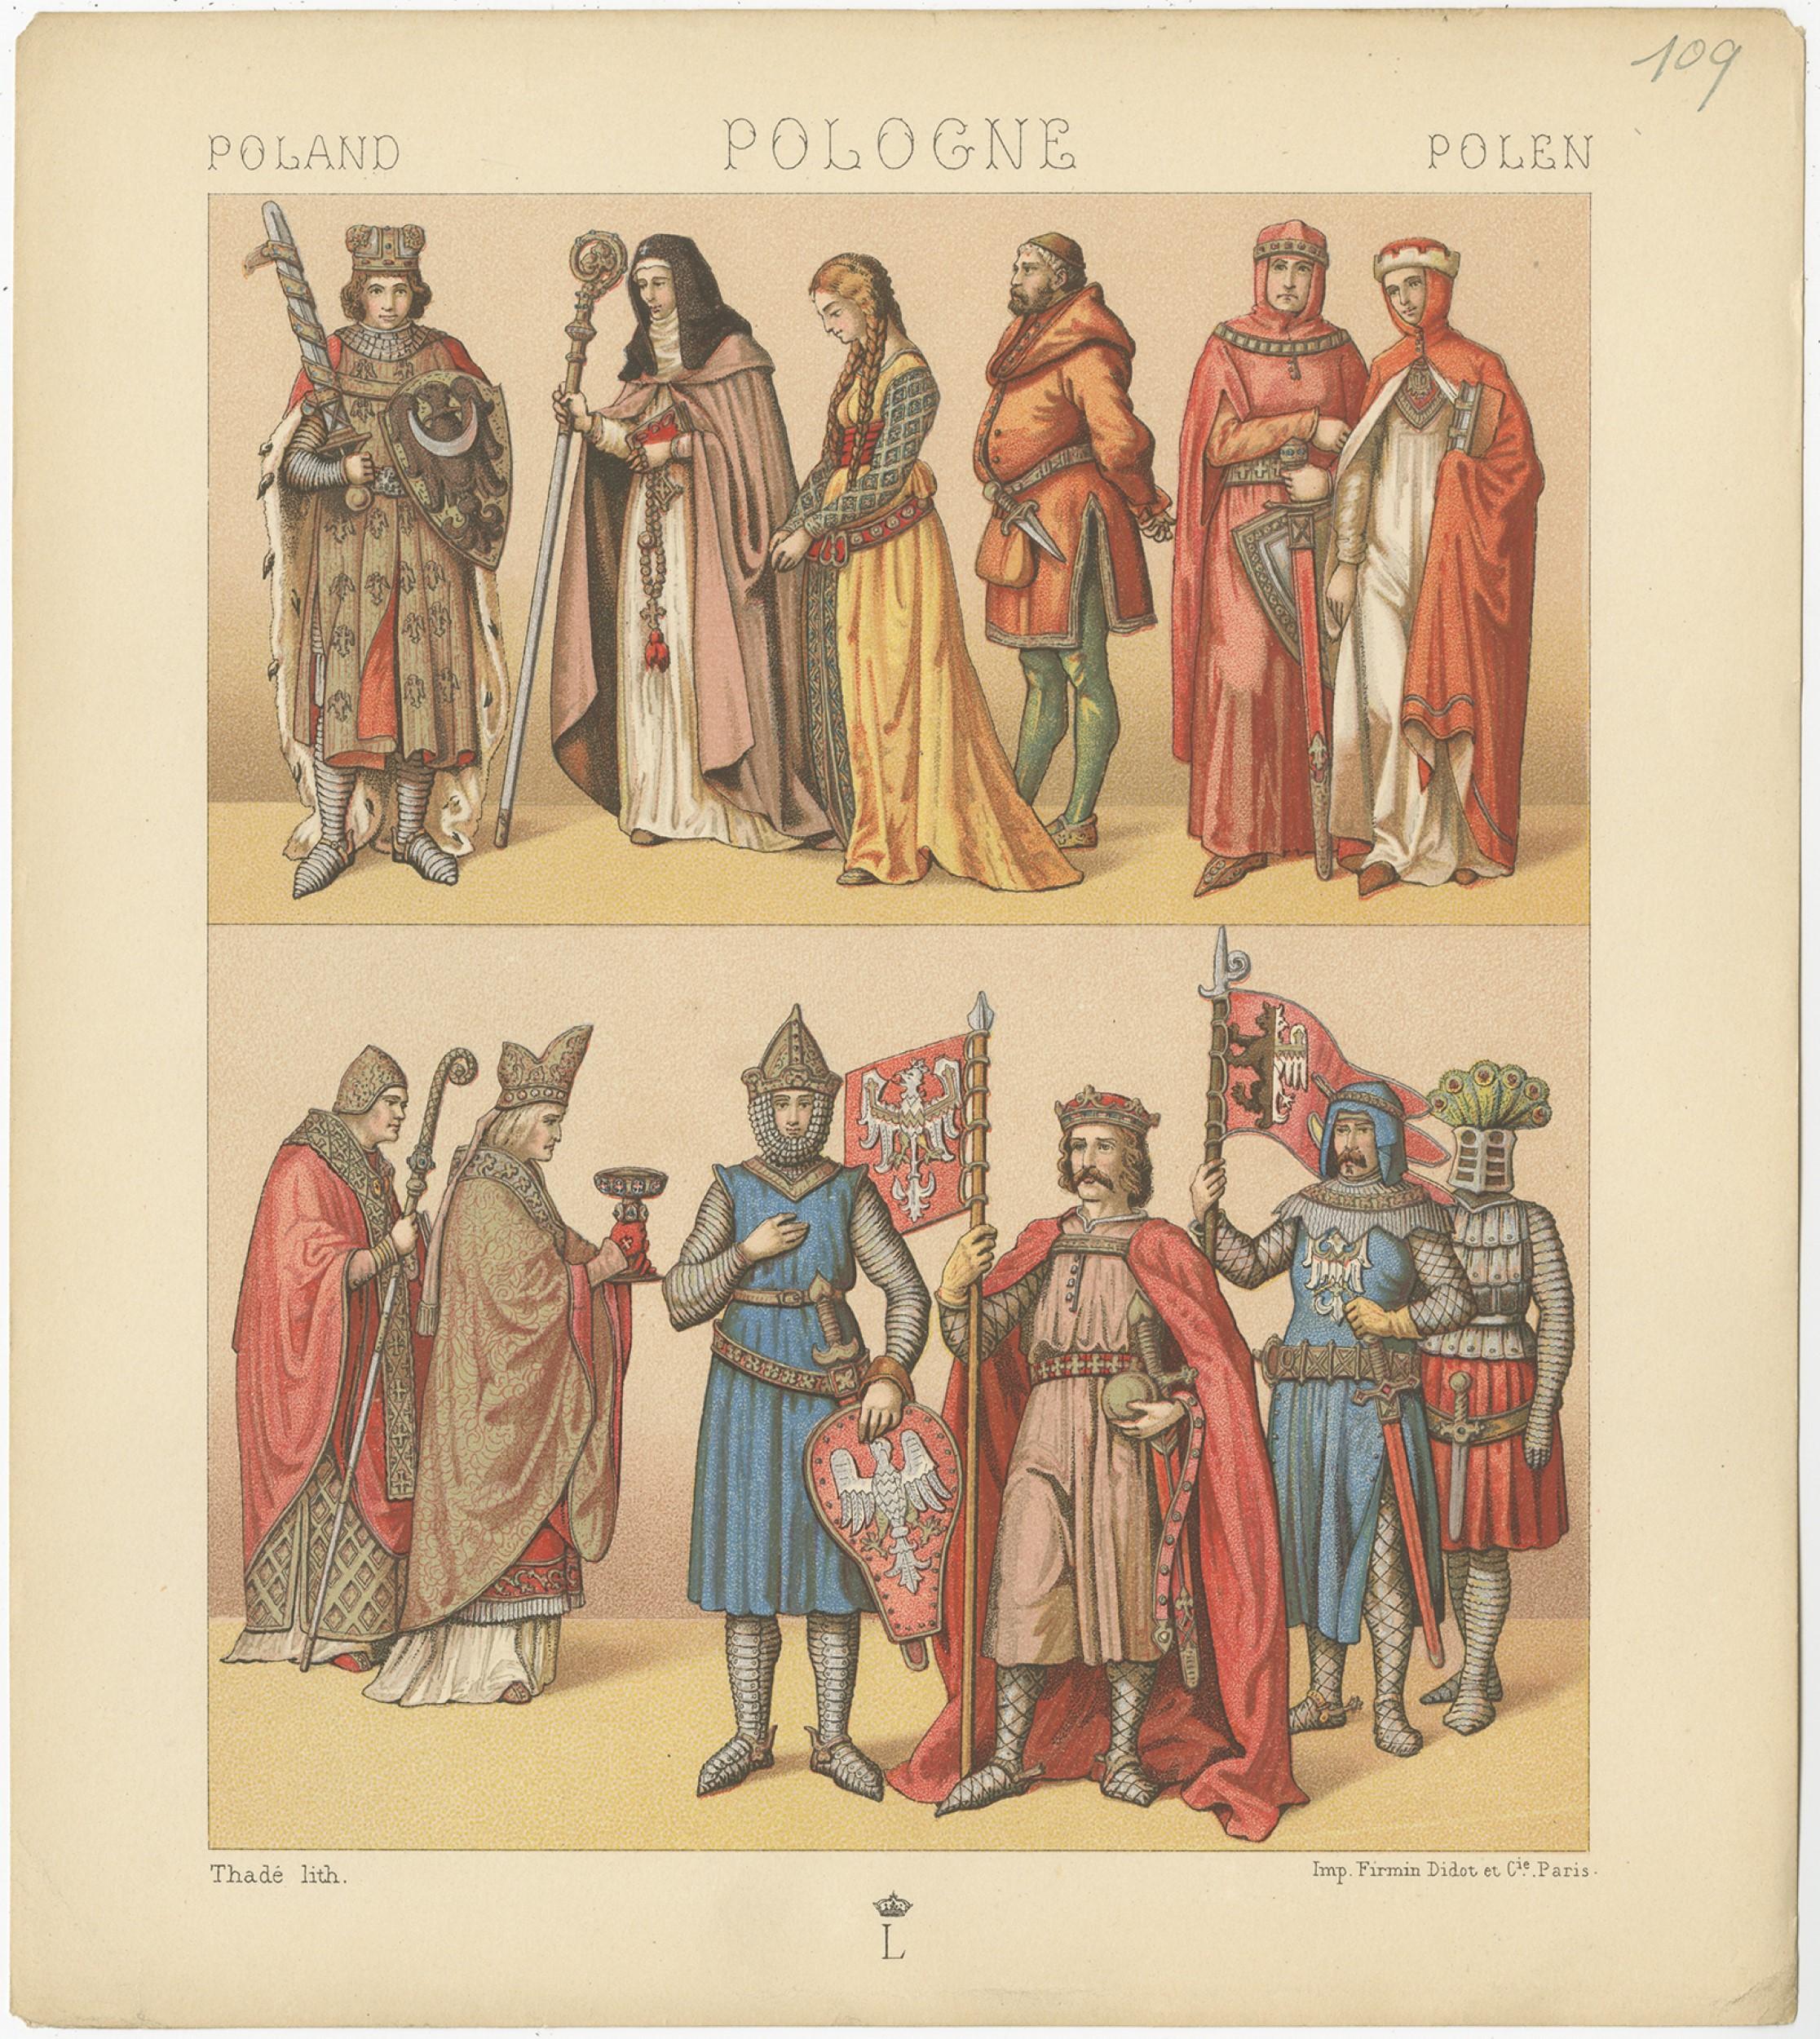 Antique print titled 'Poland - Pologne - Polen'. Chromolithograph of Polish Royalty's and Servants. This print originates from 'Le Costume Historique' by M.A. Racinet. Published, circa 1880.